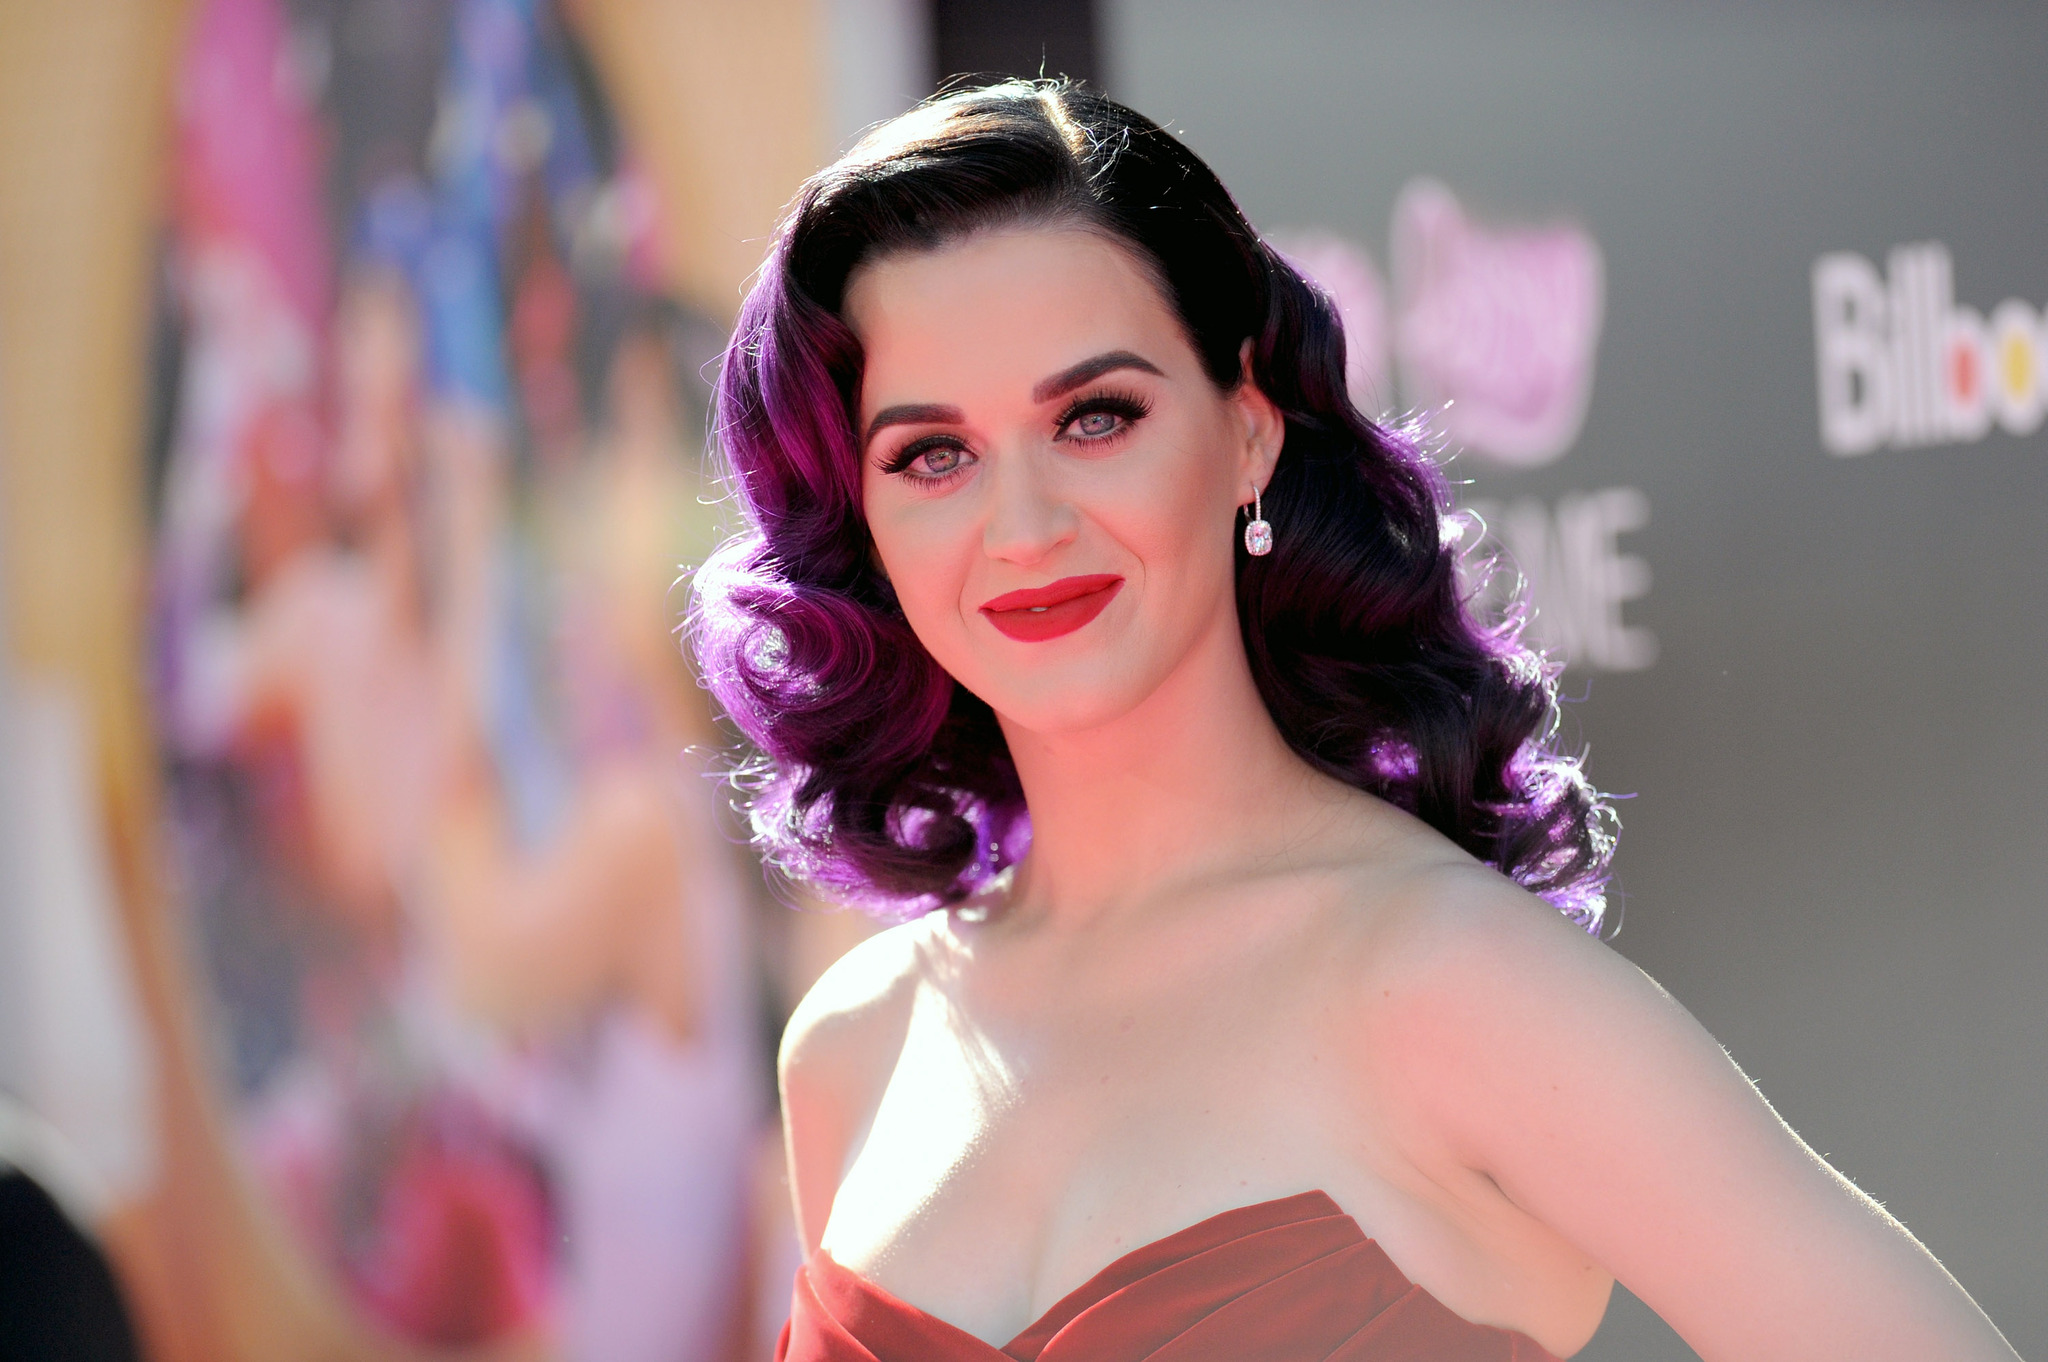 Katy Perry at event of Katy Perry: Part of Me (2012)